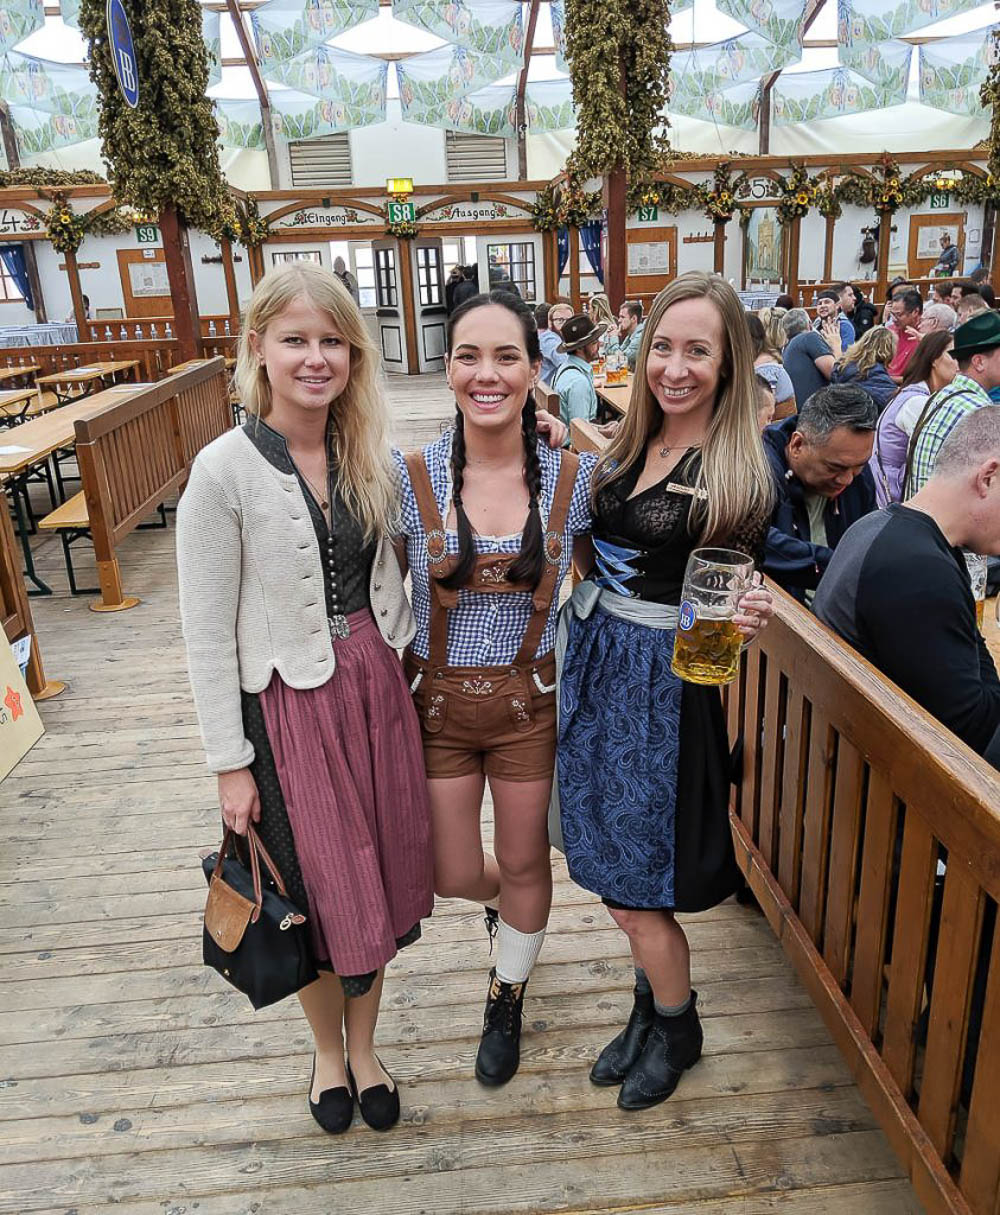 me and two friends in traditional oktoberfest outfits in a beer tent at oktoberfest in munich